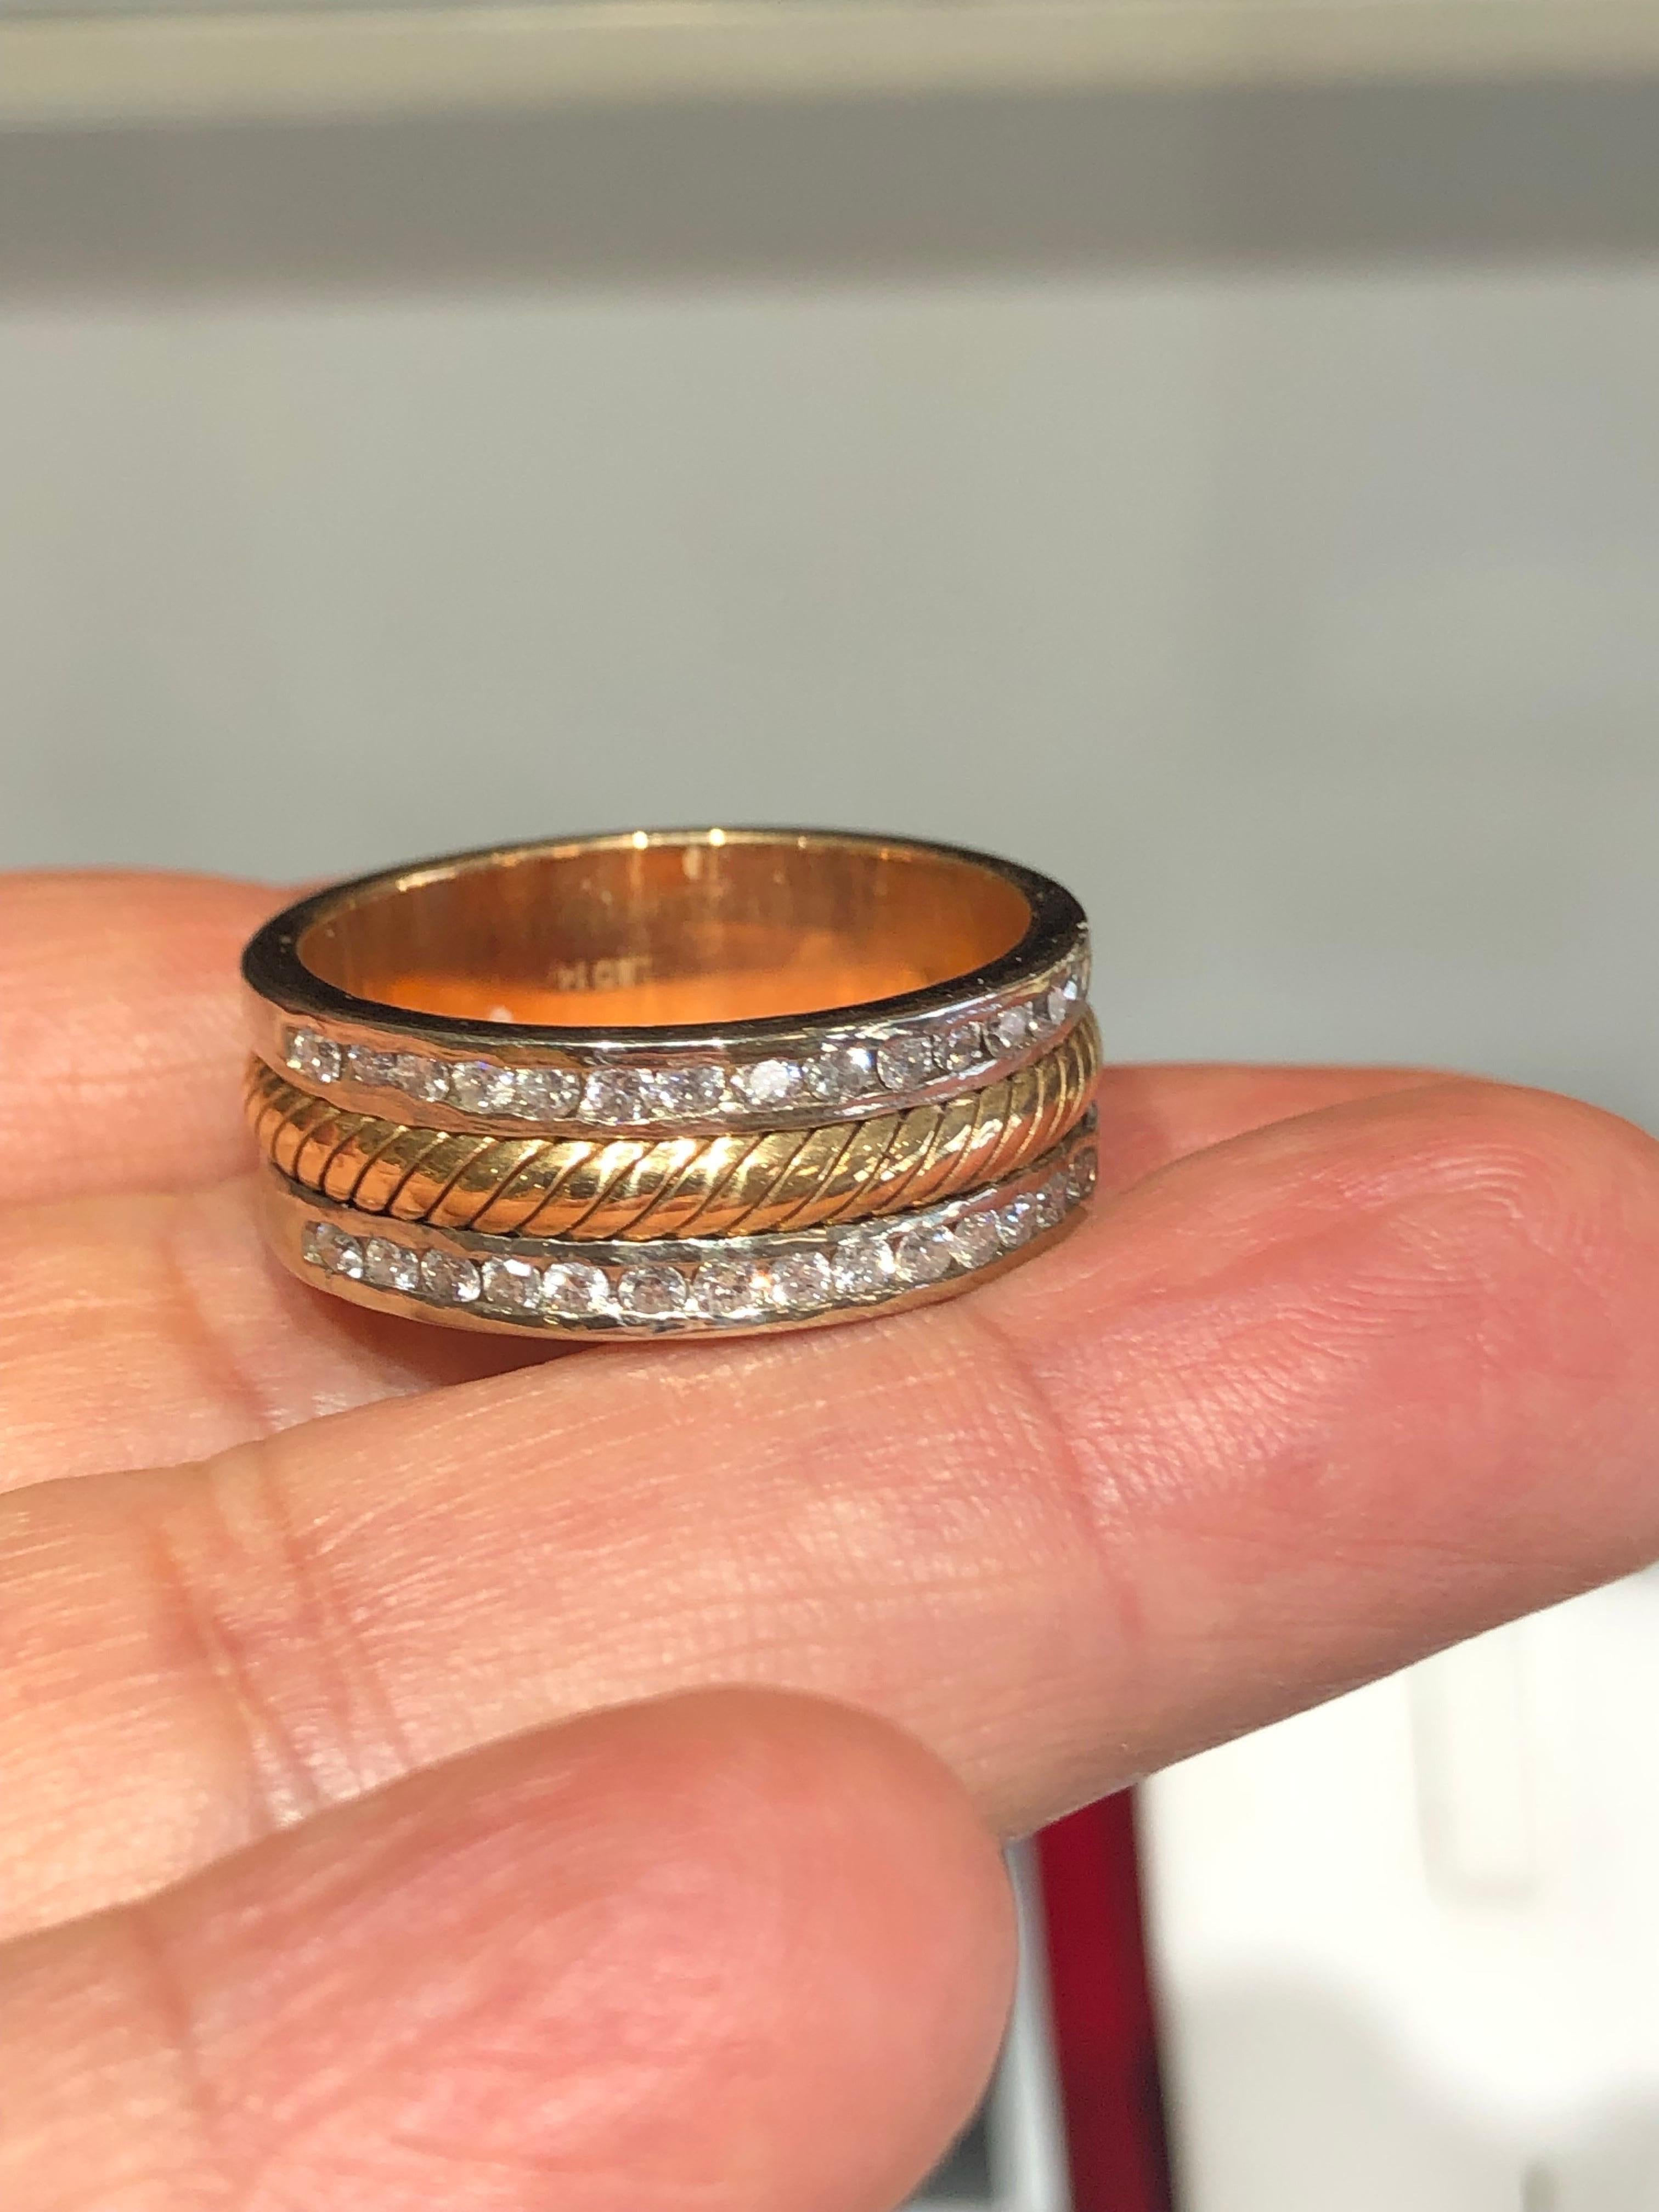 Band Ring One of a Kind Designer featuring a stunning textured 14K yellow gold, set with round brilliant cut diamonds, weighing a combined 0.80 carats (G-H color, and VS-SI1 clarity). 
The ring is size 12(not sizable) and weighs substantial 13